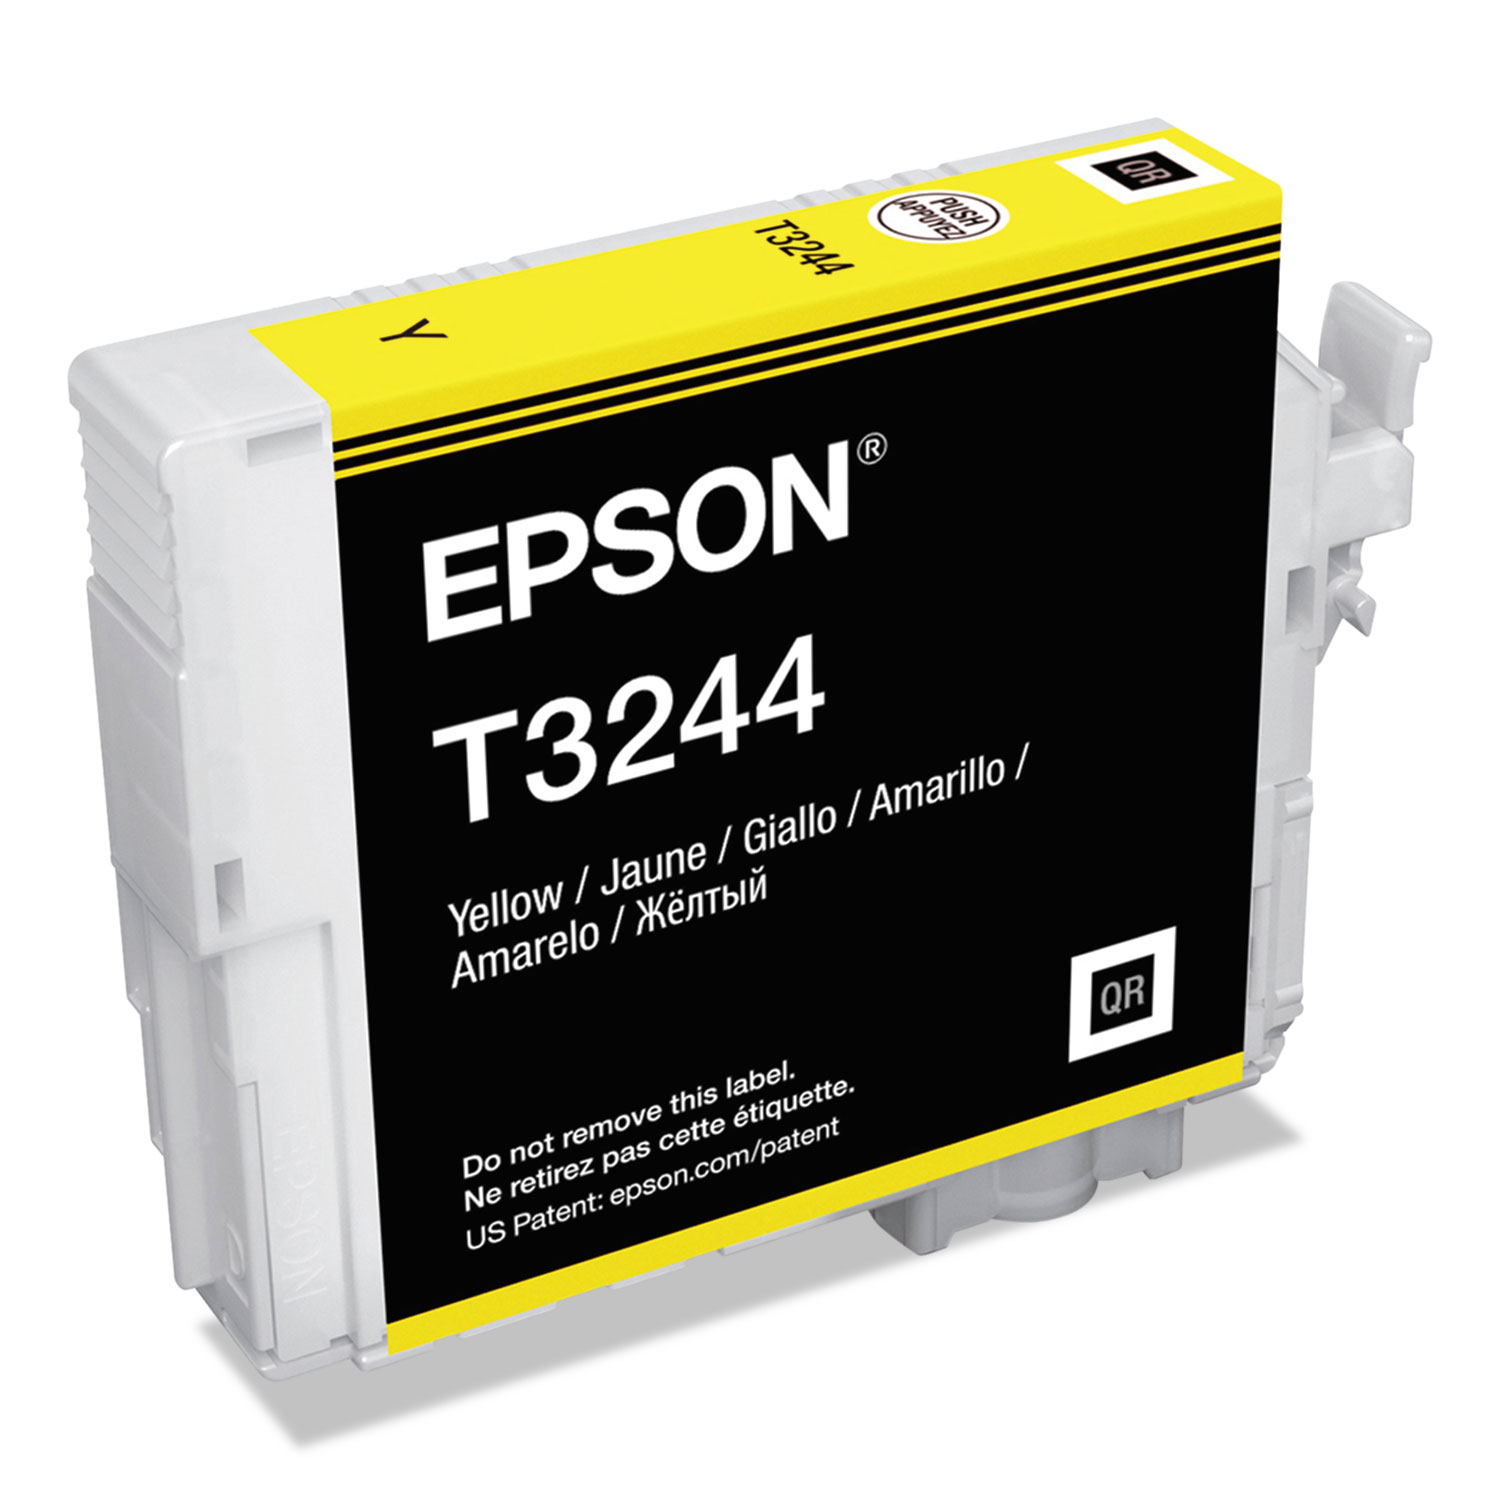 T324420 (324) UltraChrome HG2 Ink, Yellow